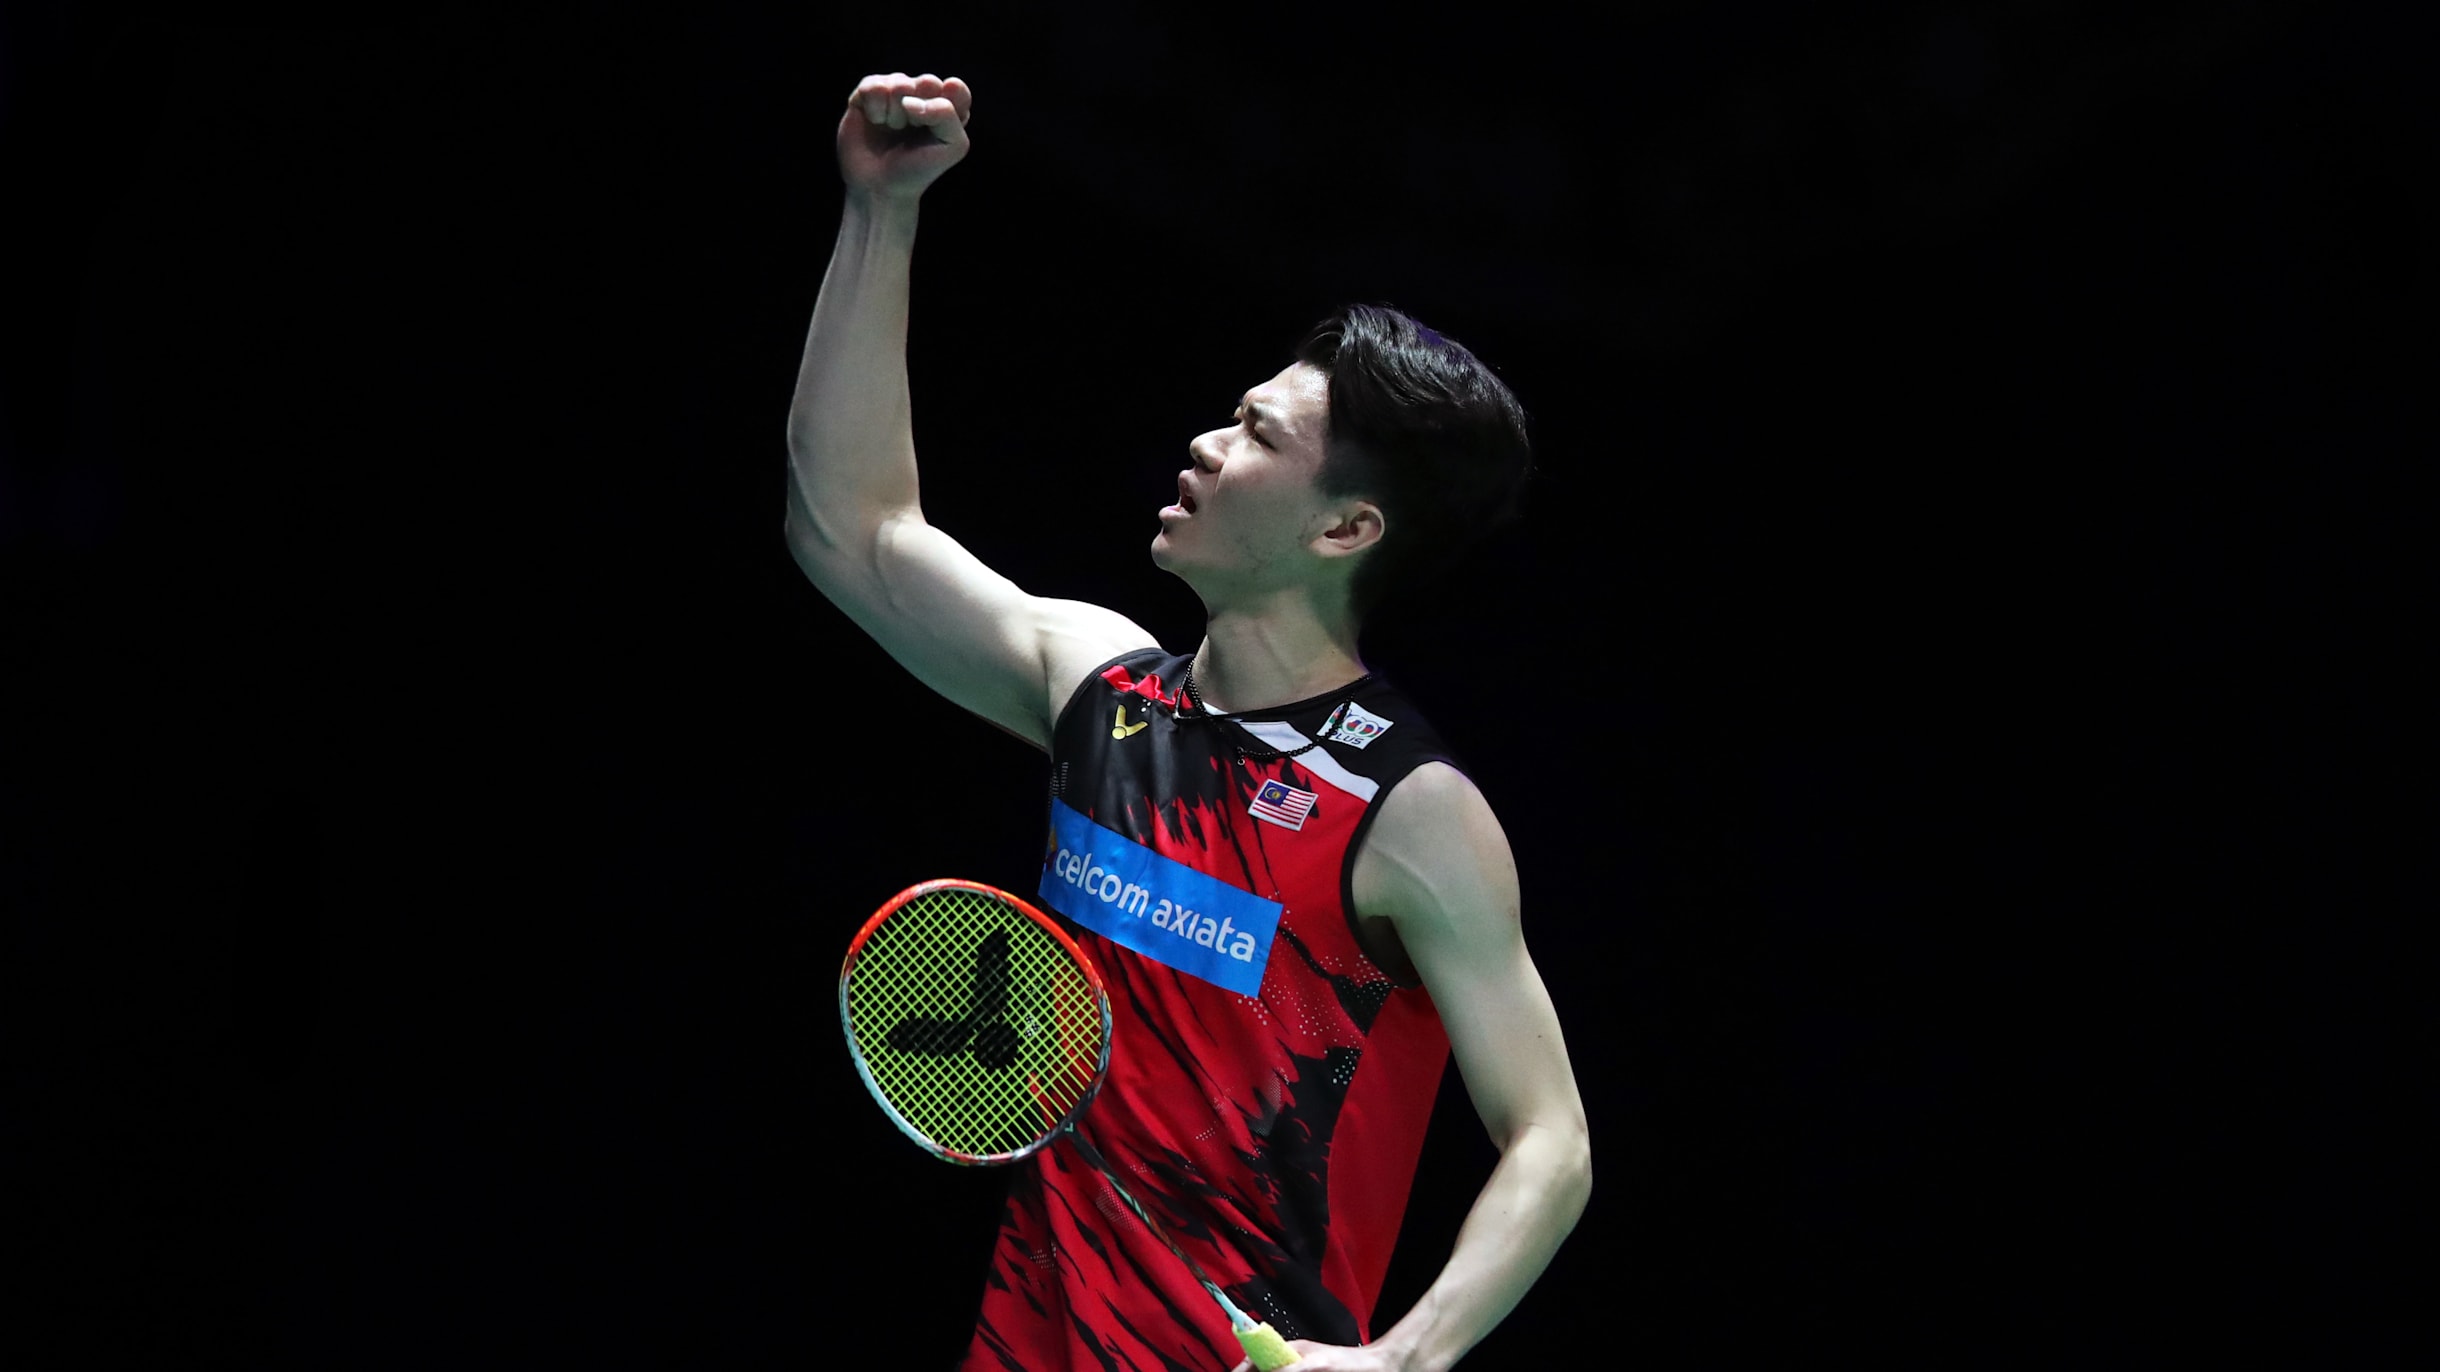 live streaming indonesia masters badminton 2021